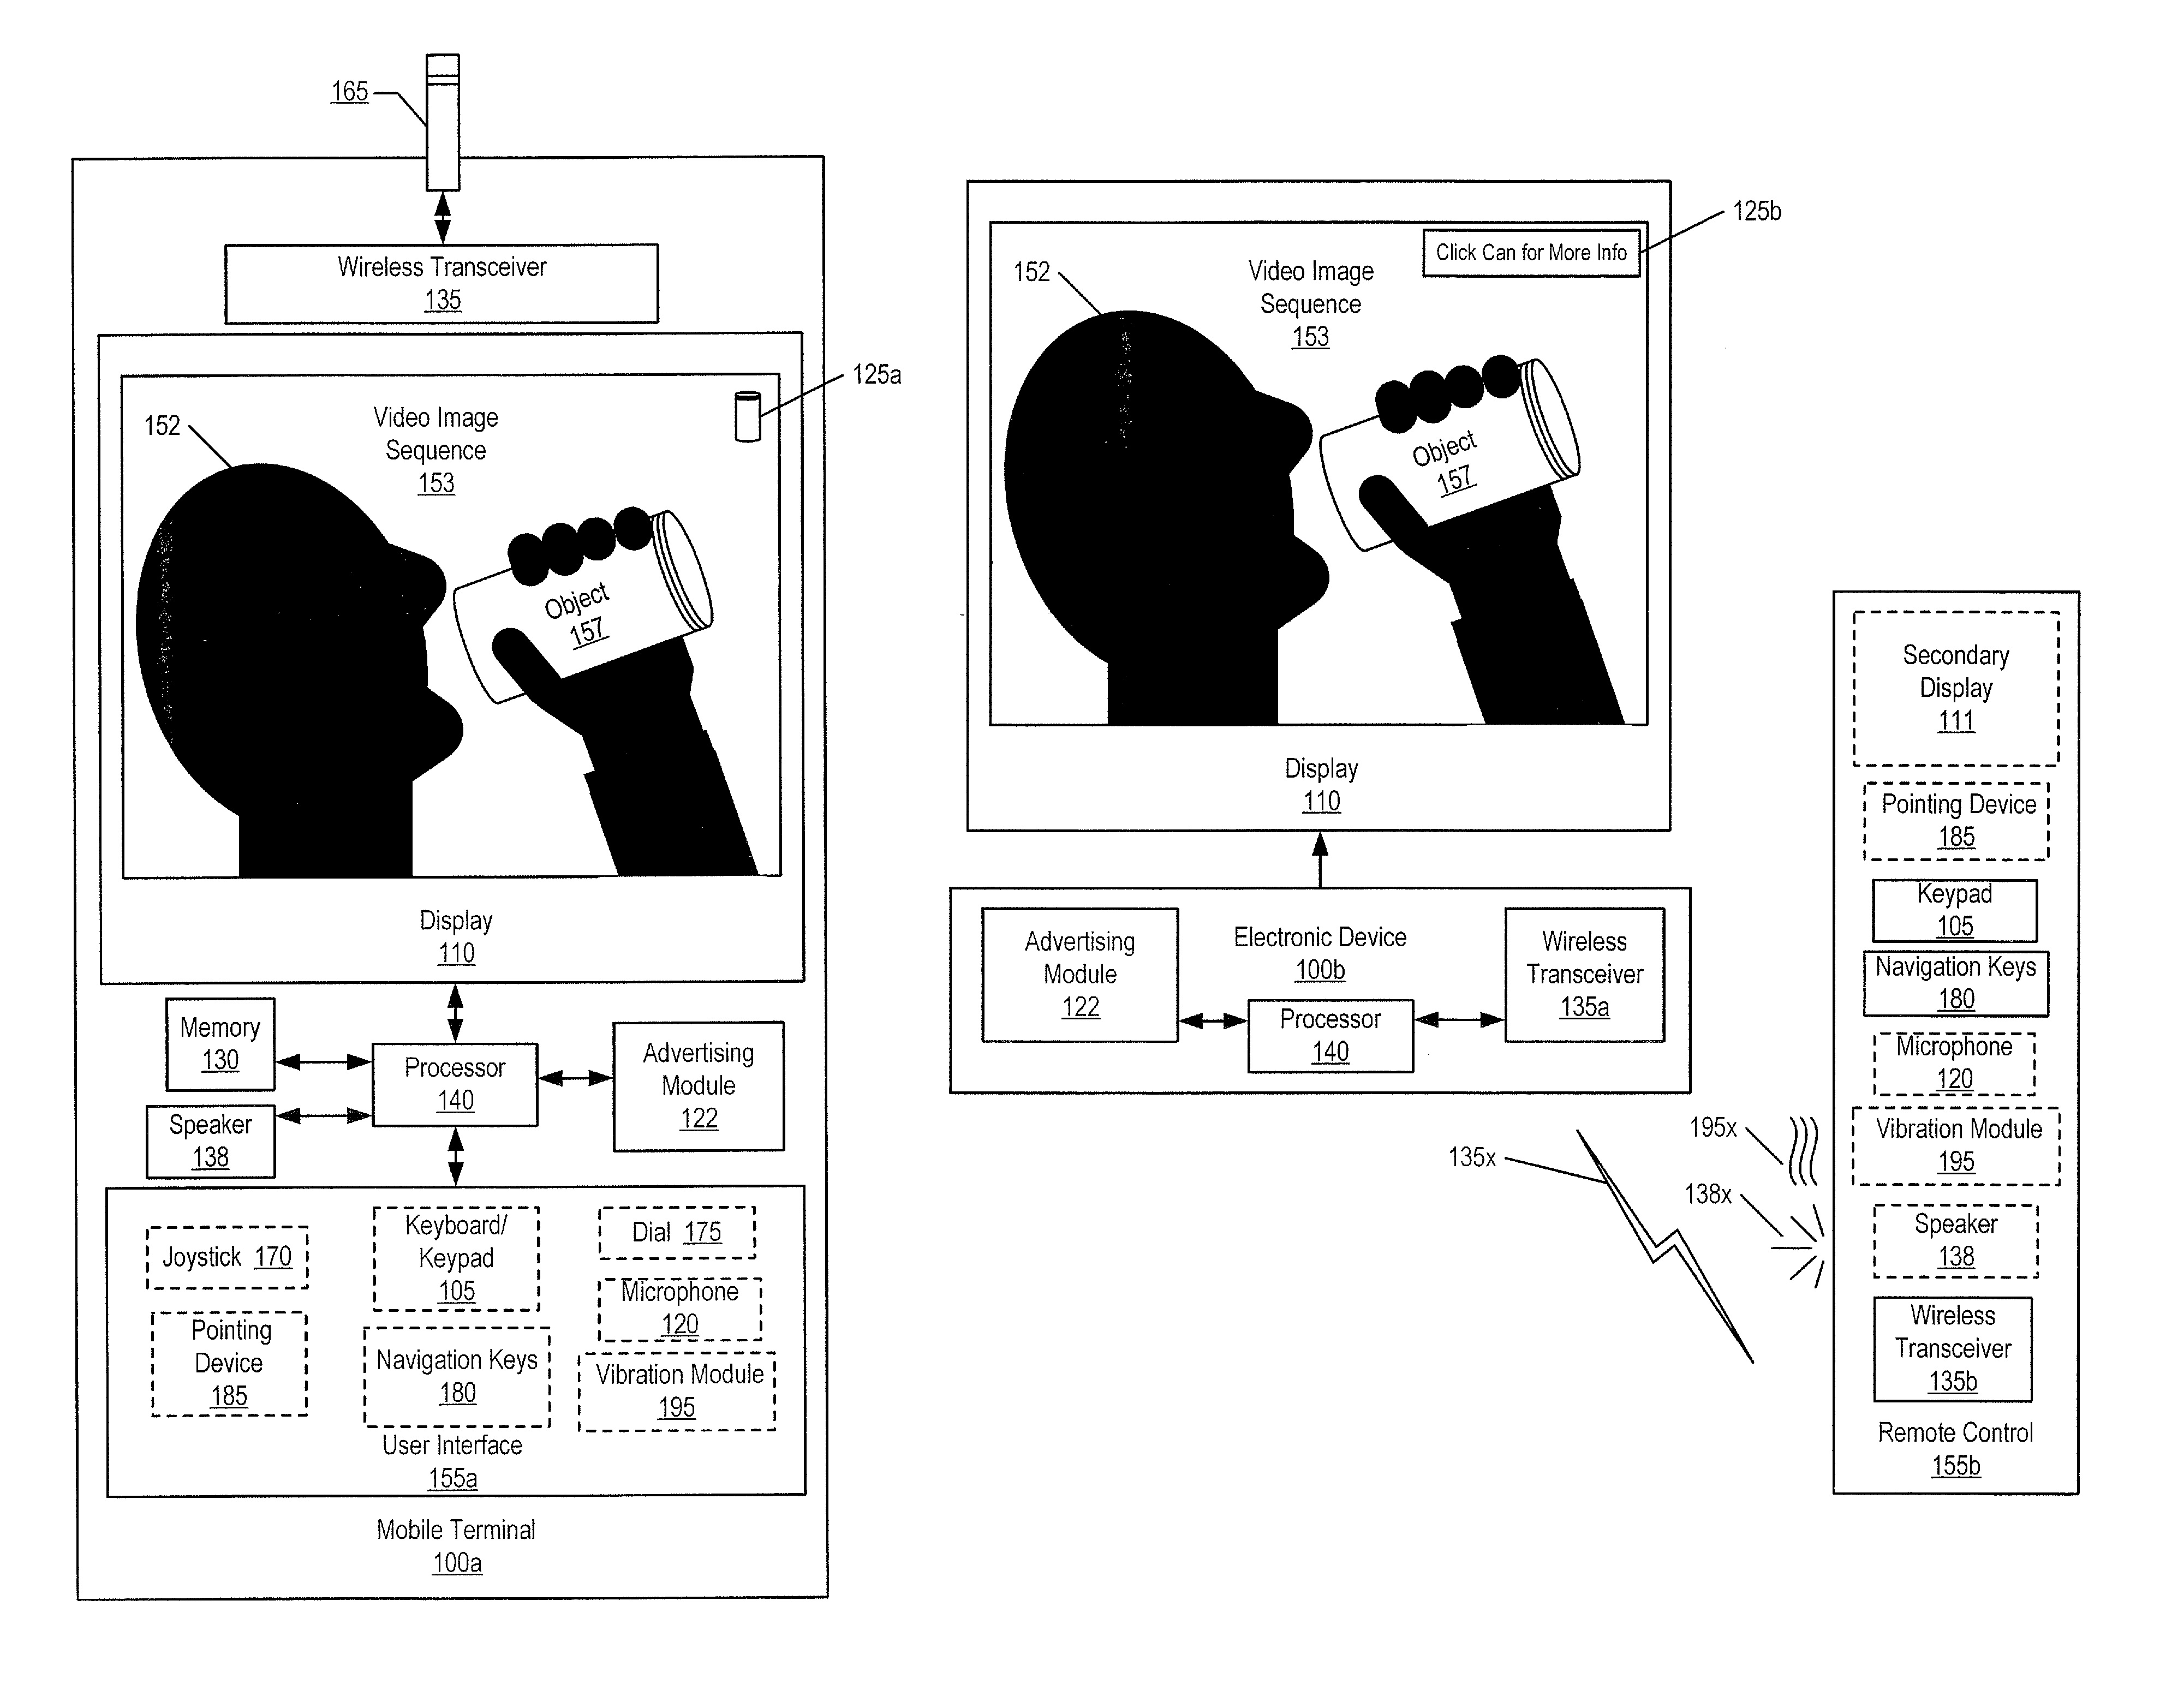 Methods, devices, and computer program products for providing unobtrusive video advertising content